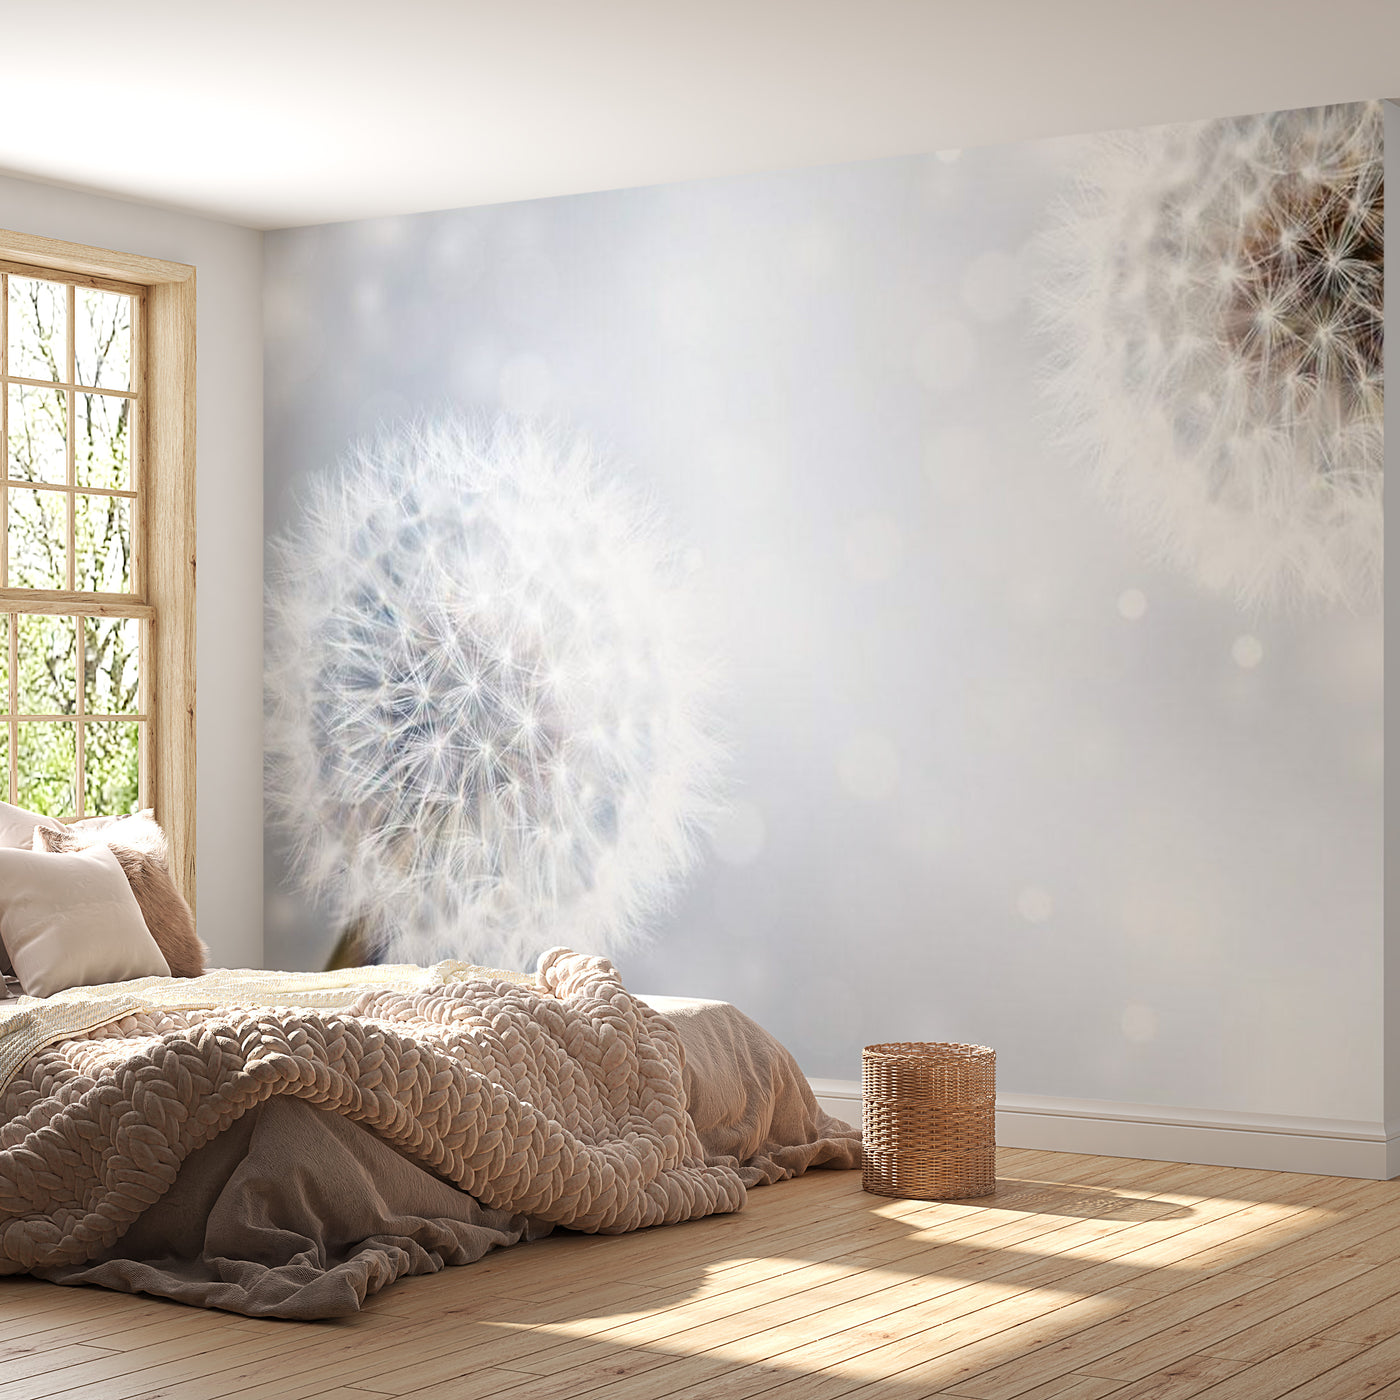 Peel & Stick Floral Wall Mural - Unpredictable Moments - Removable Wall Decals